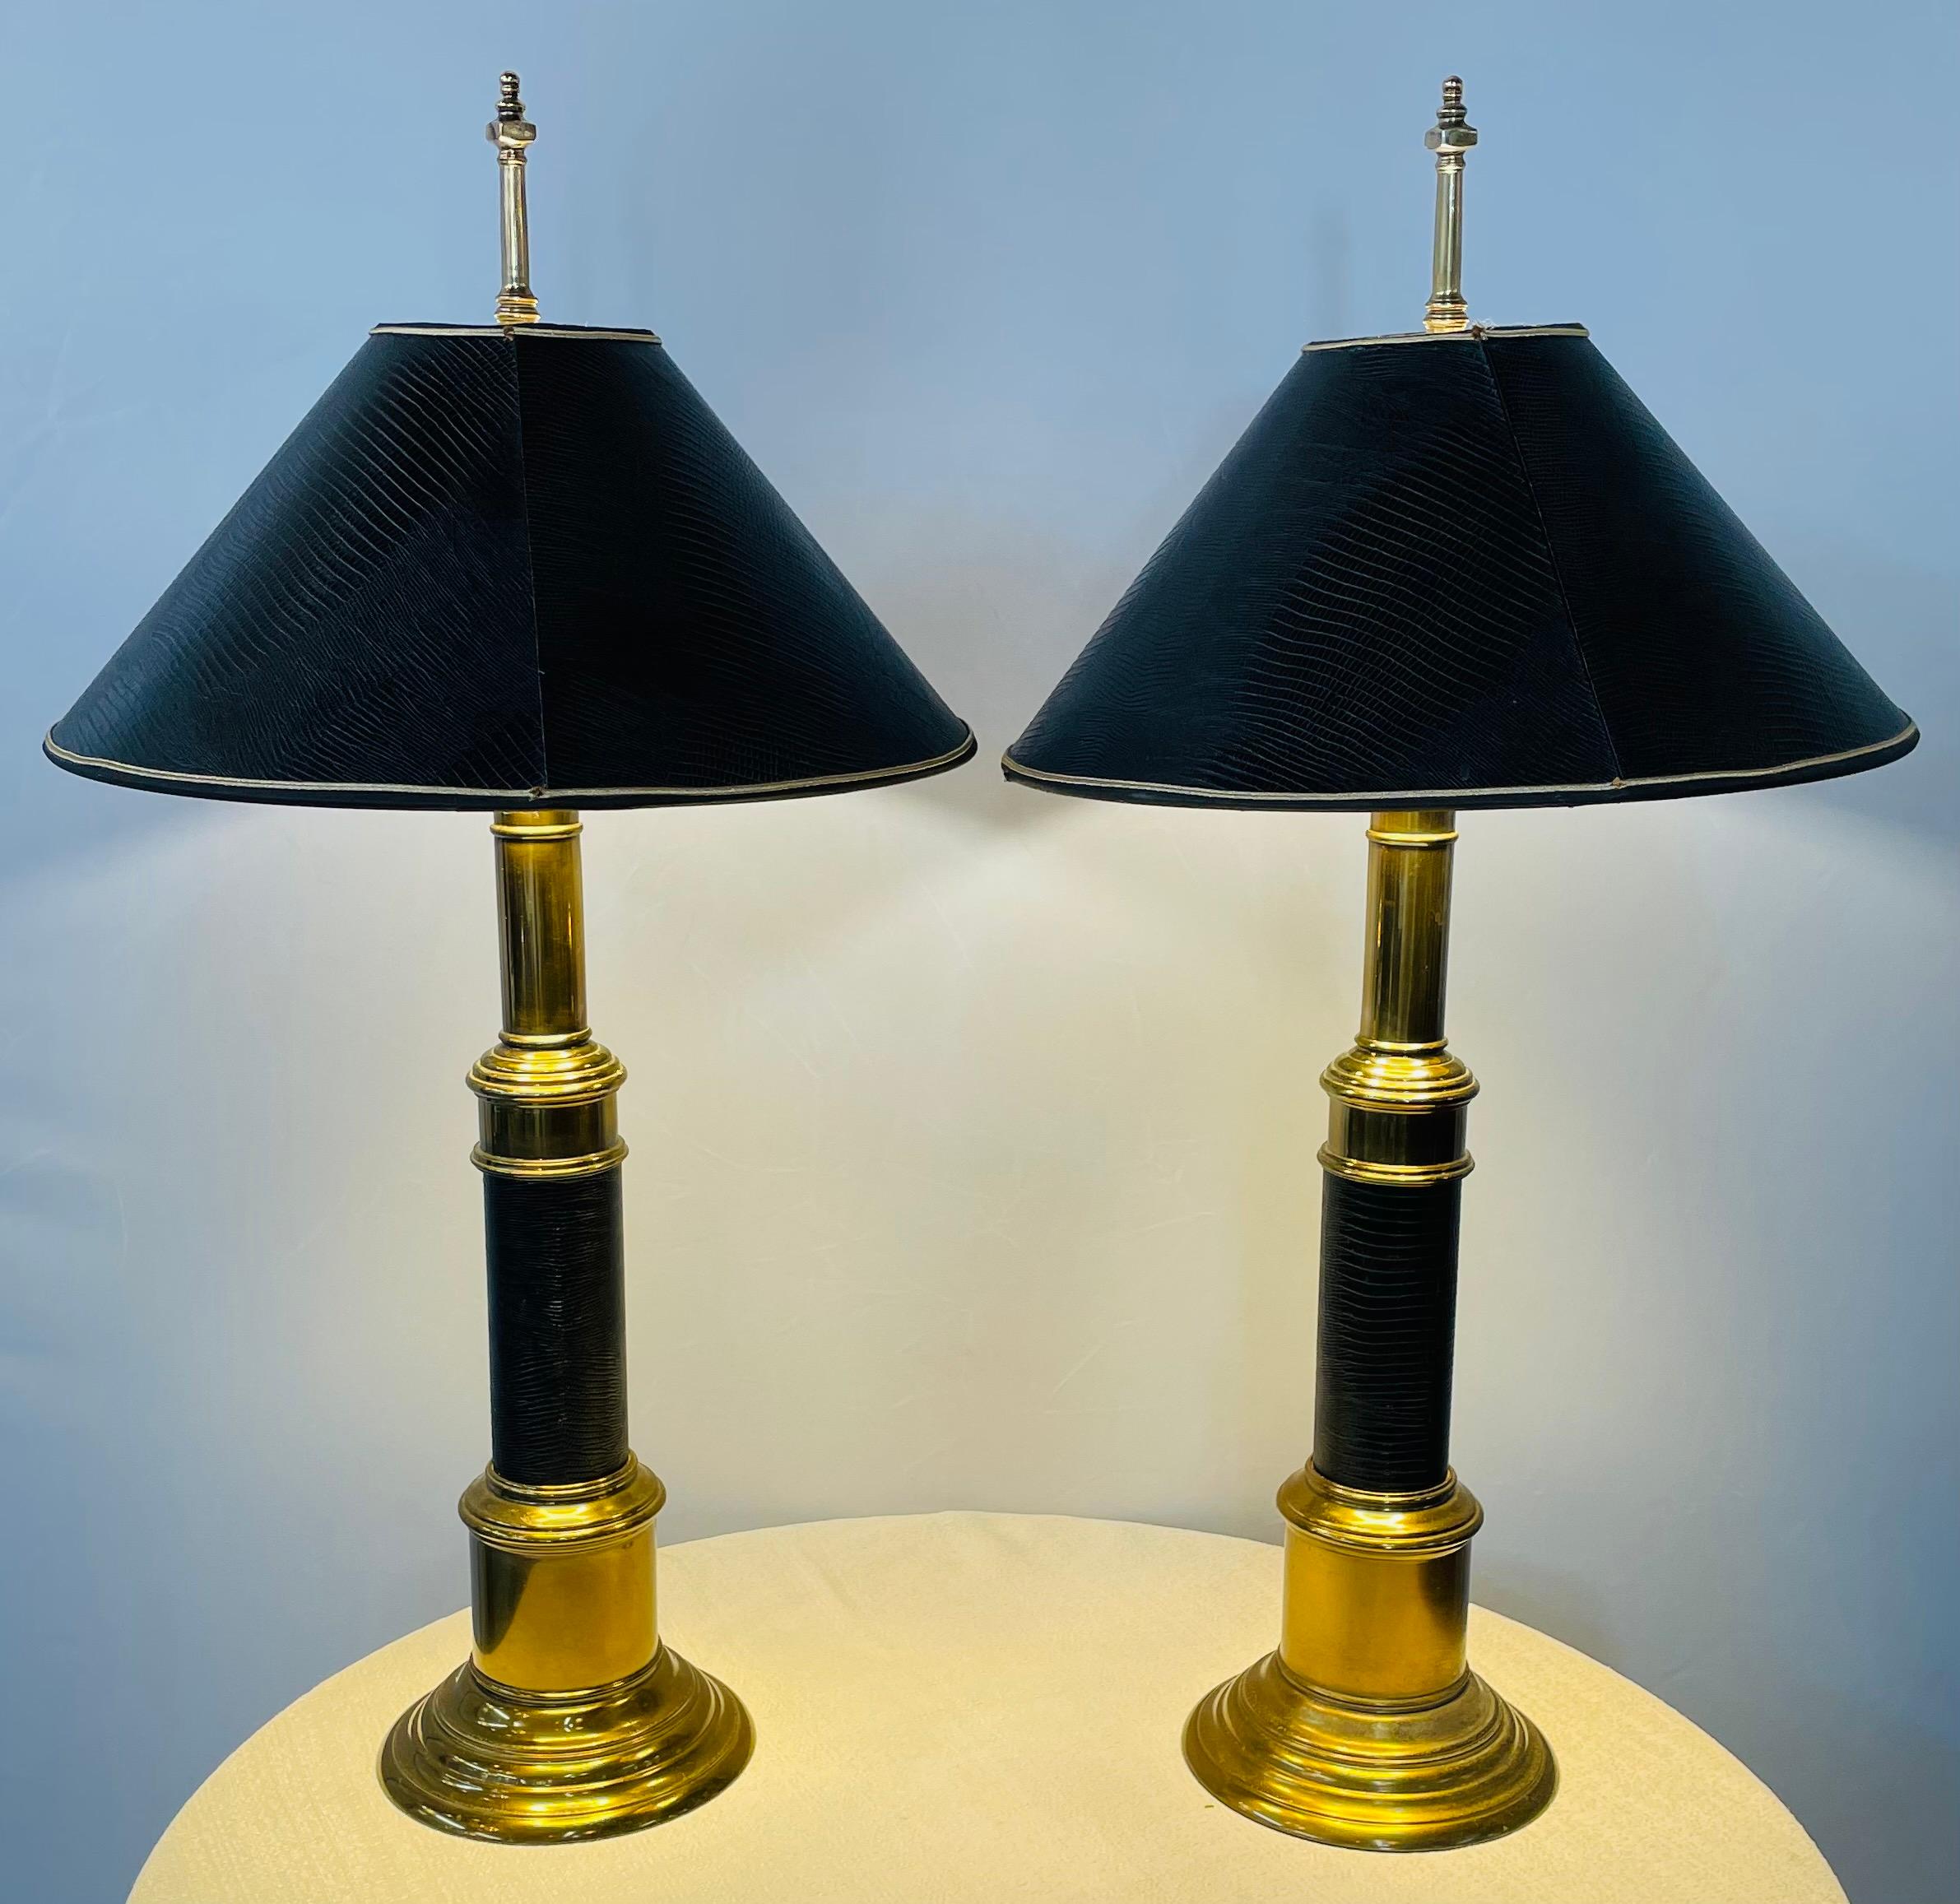 A Mid-Century Modern pair of elegant table lamps attributed to Stiffel. Each lamp is made of heavy solid brass with the column wrapped in black embossed leather matching its original bell shades. Elegant, classy and very stylish, the pair of lamps